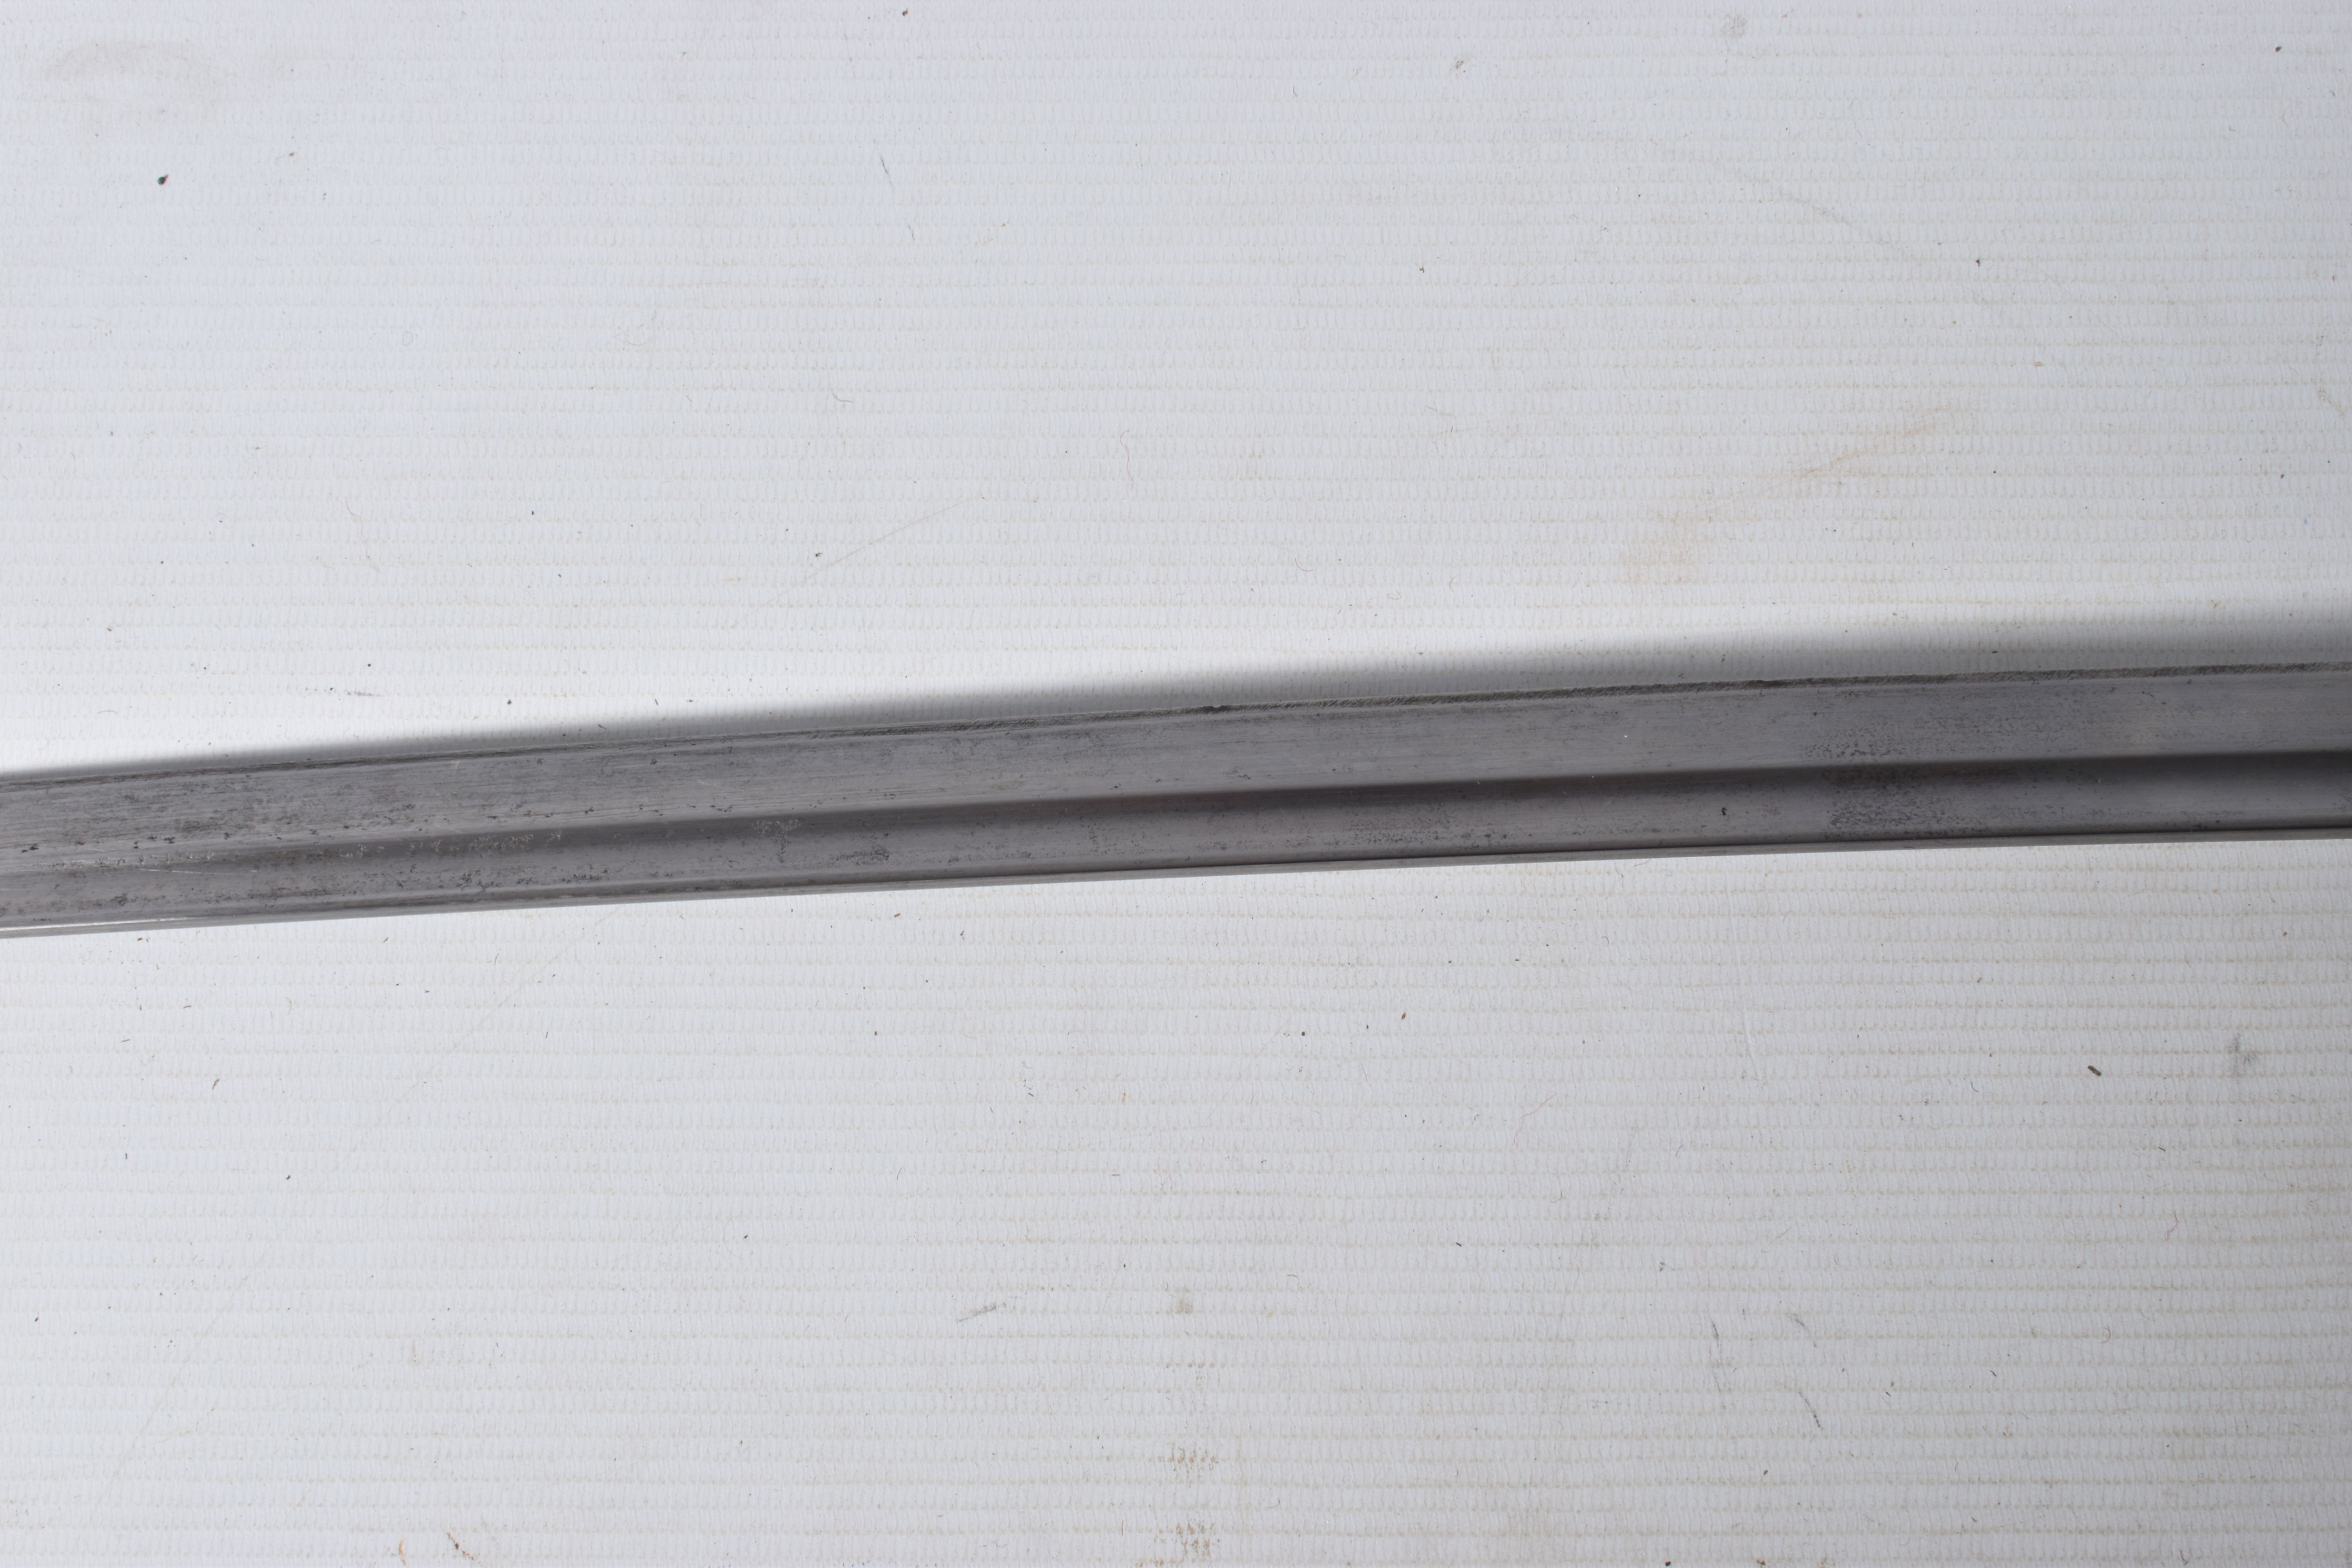 A JAPANESE TYPE 32 OTSU SABRE, the blade has no markings but has the serial number 60866 at the - Image 22 of 29